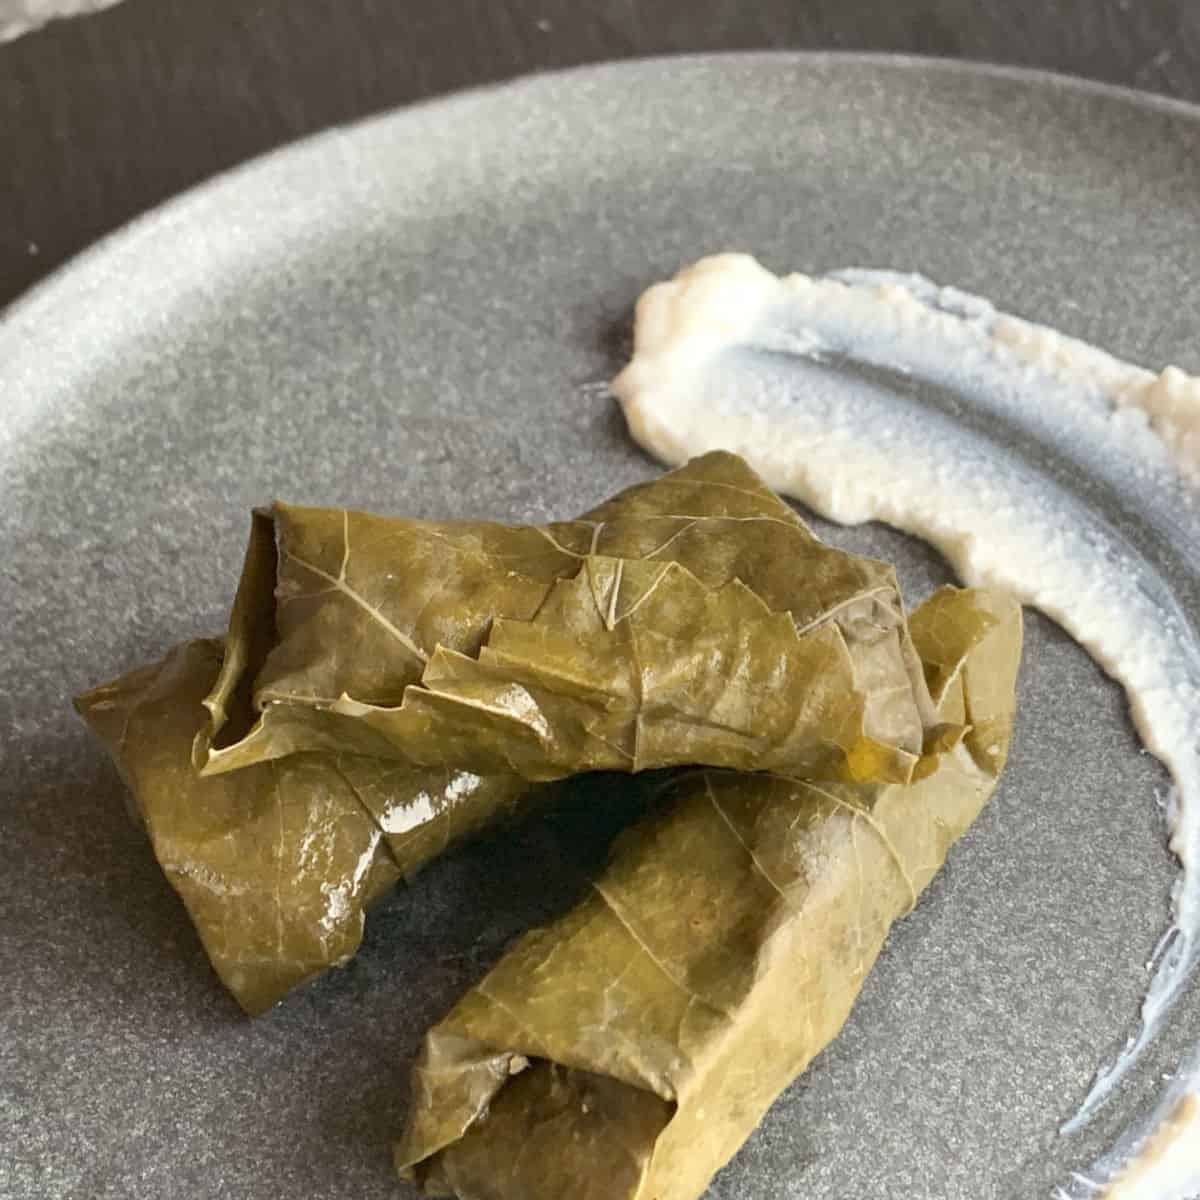 Tolma with grape leaves.